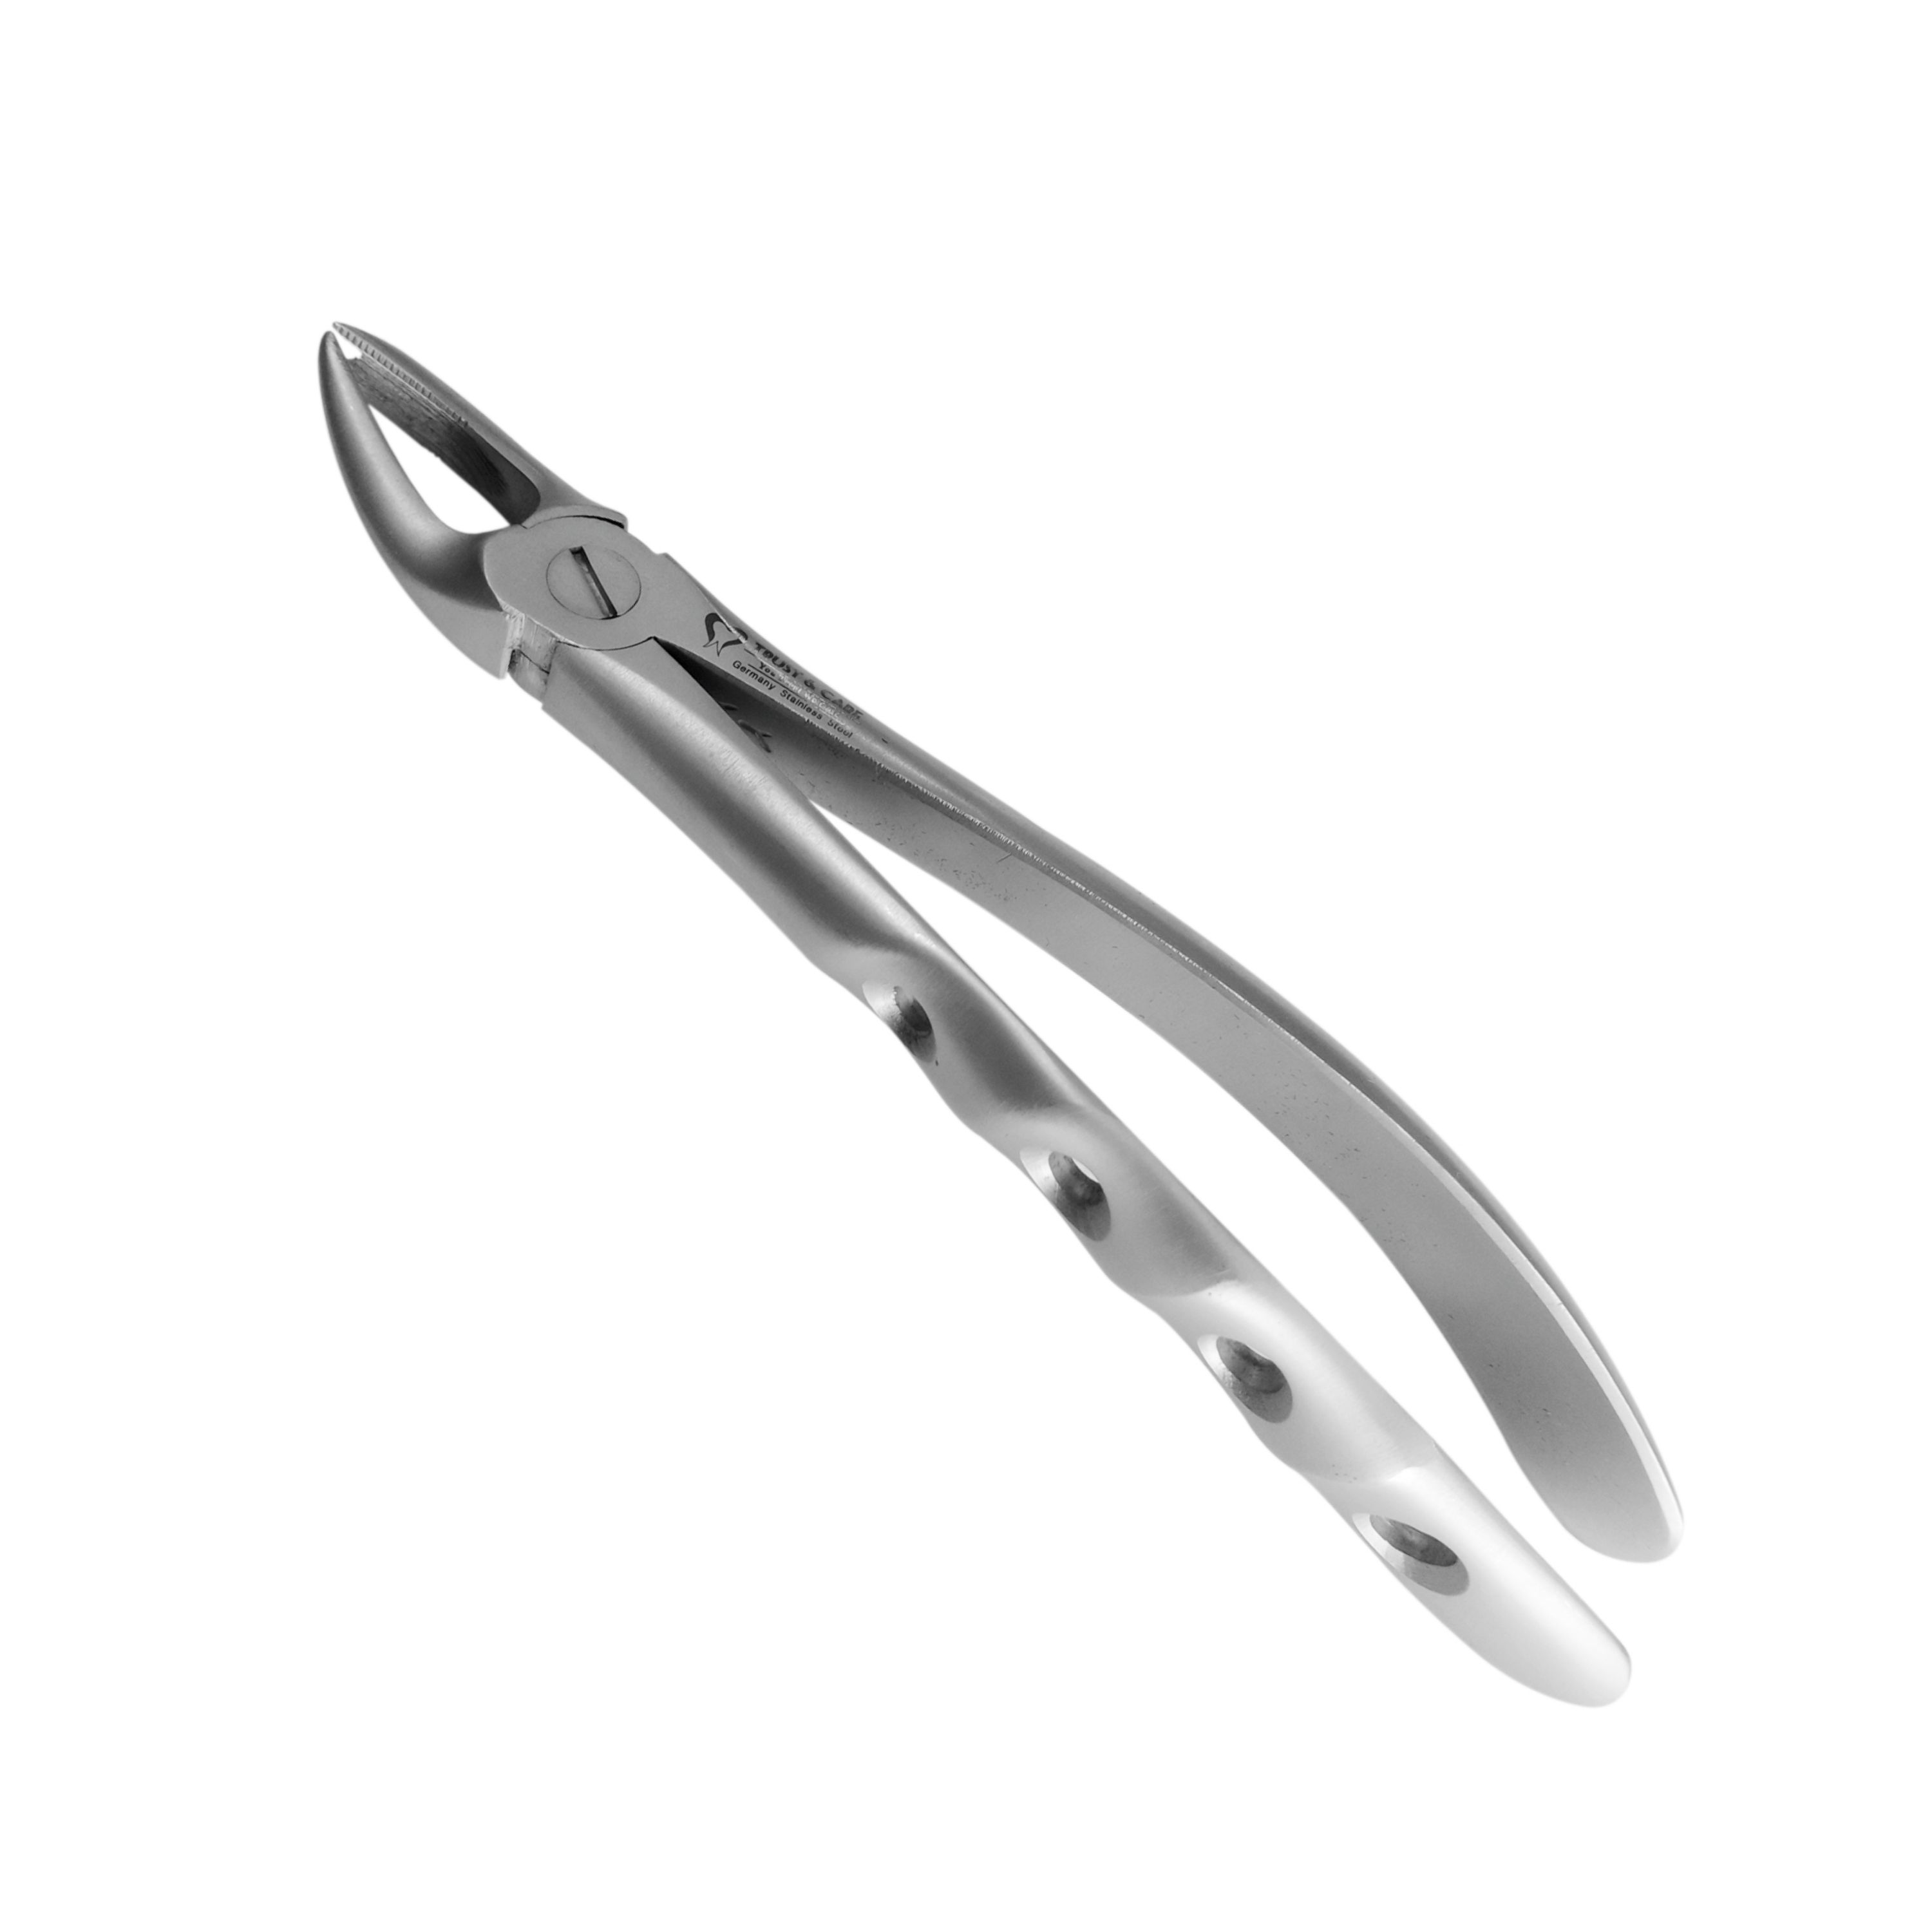 Trust & Care Tooth Extraction Forcep Upper Molars Right Fig No. 89 Premium